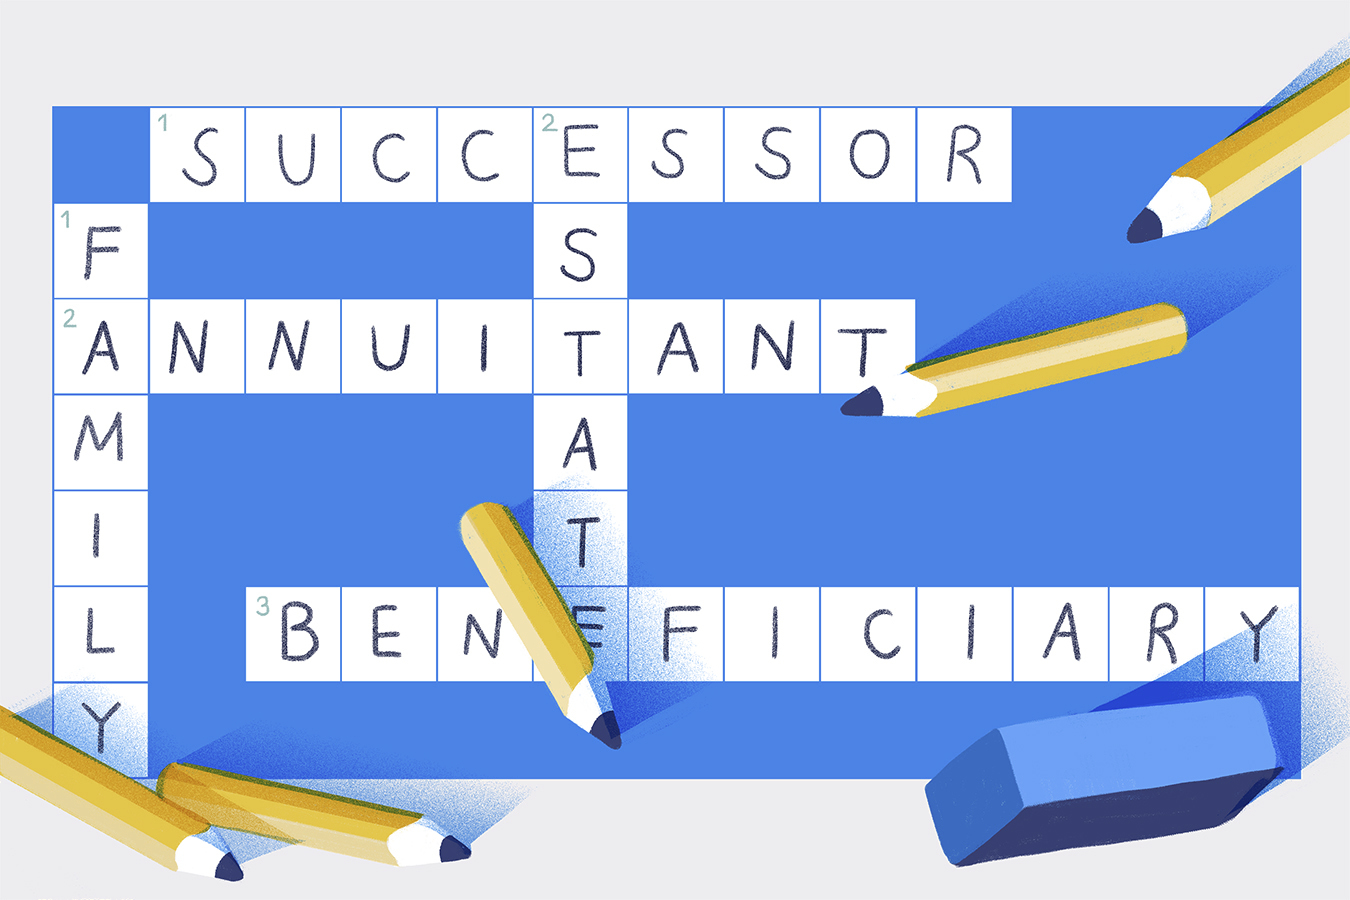 Illustration of a crossword puzzle with the words: family, successor, annuitant, estate and beneficiary.